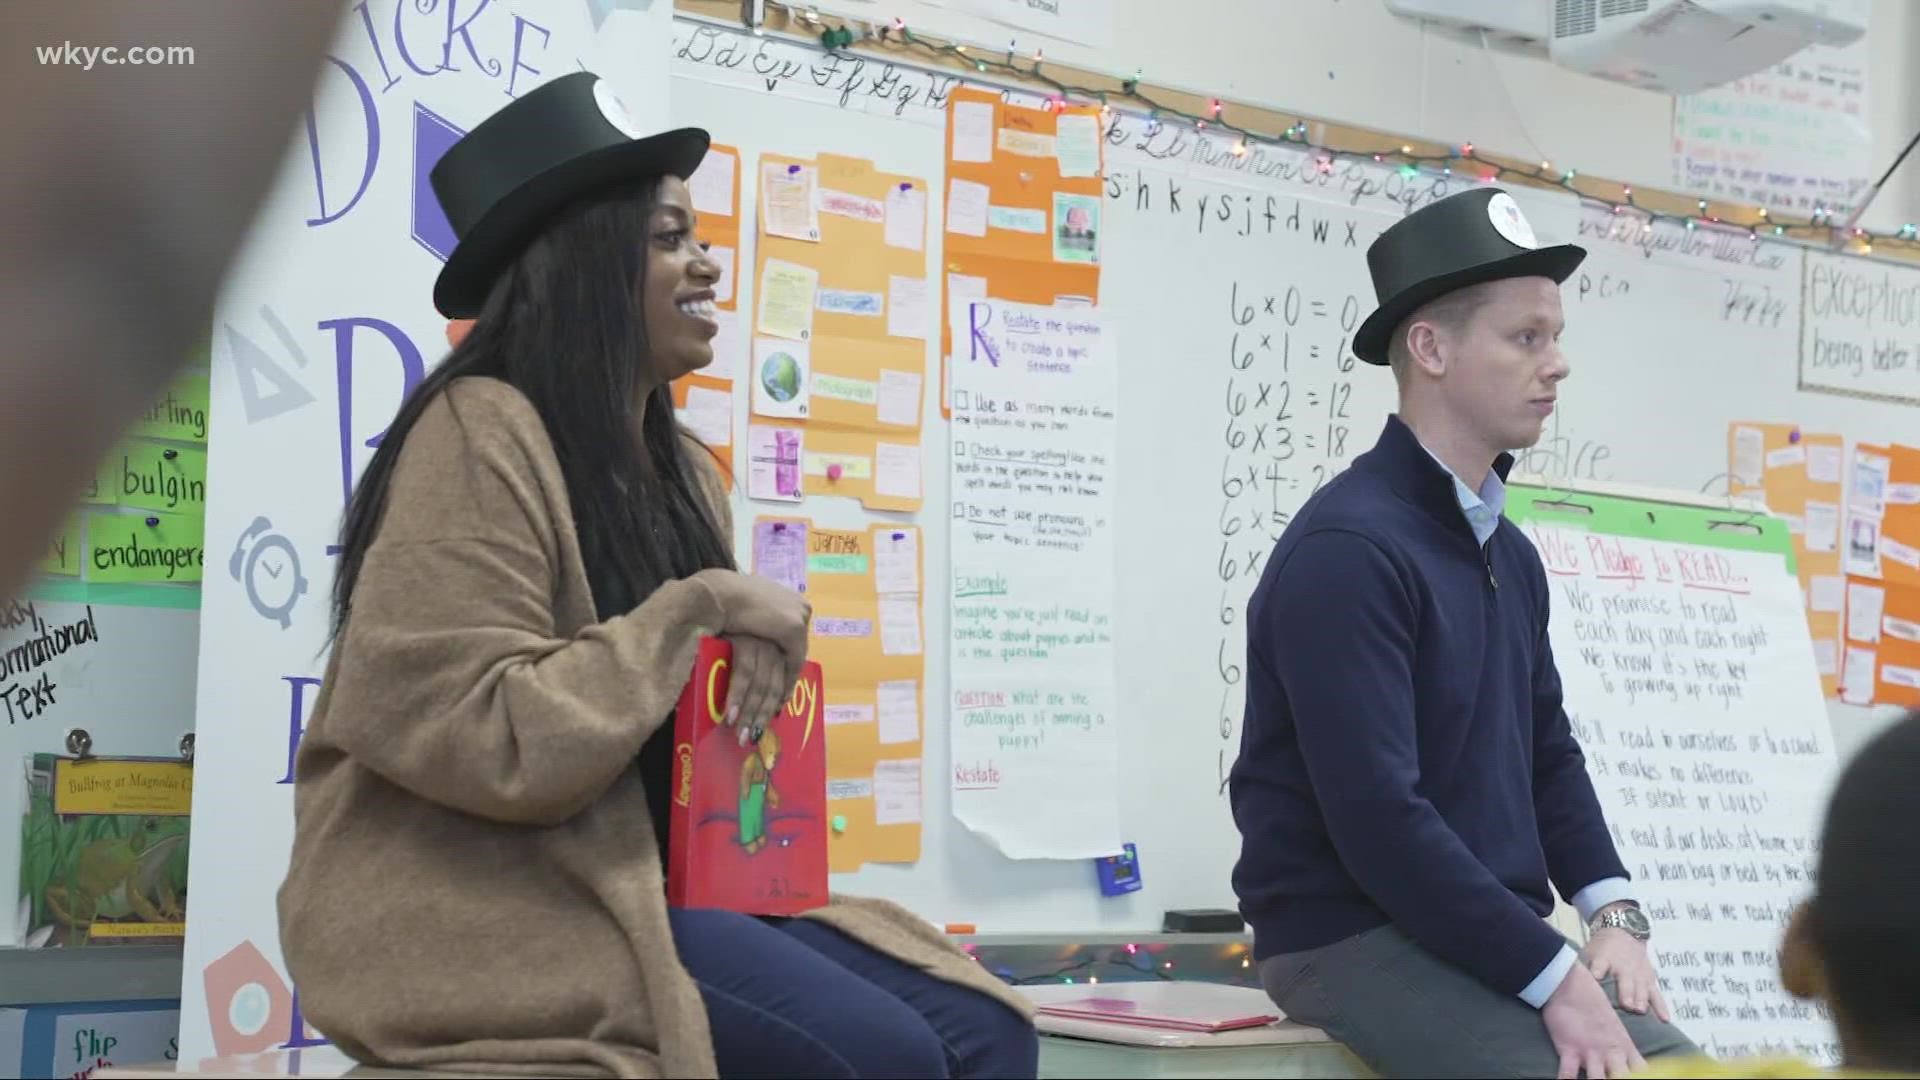 GO!'s Jasmine Monroe and Austin Love popped in to read "Corduroy" to second- and third-graders at Dickens School in Cleveland